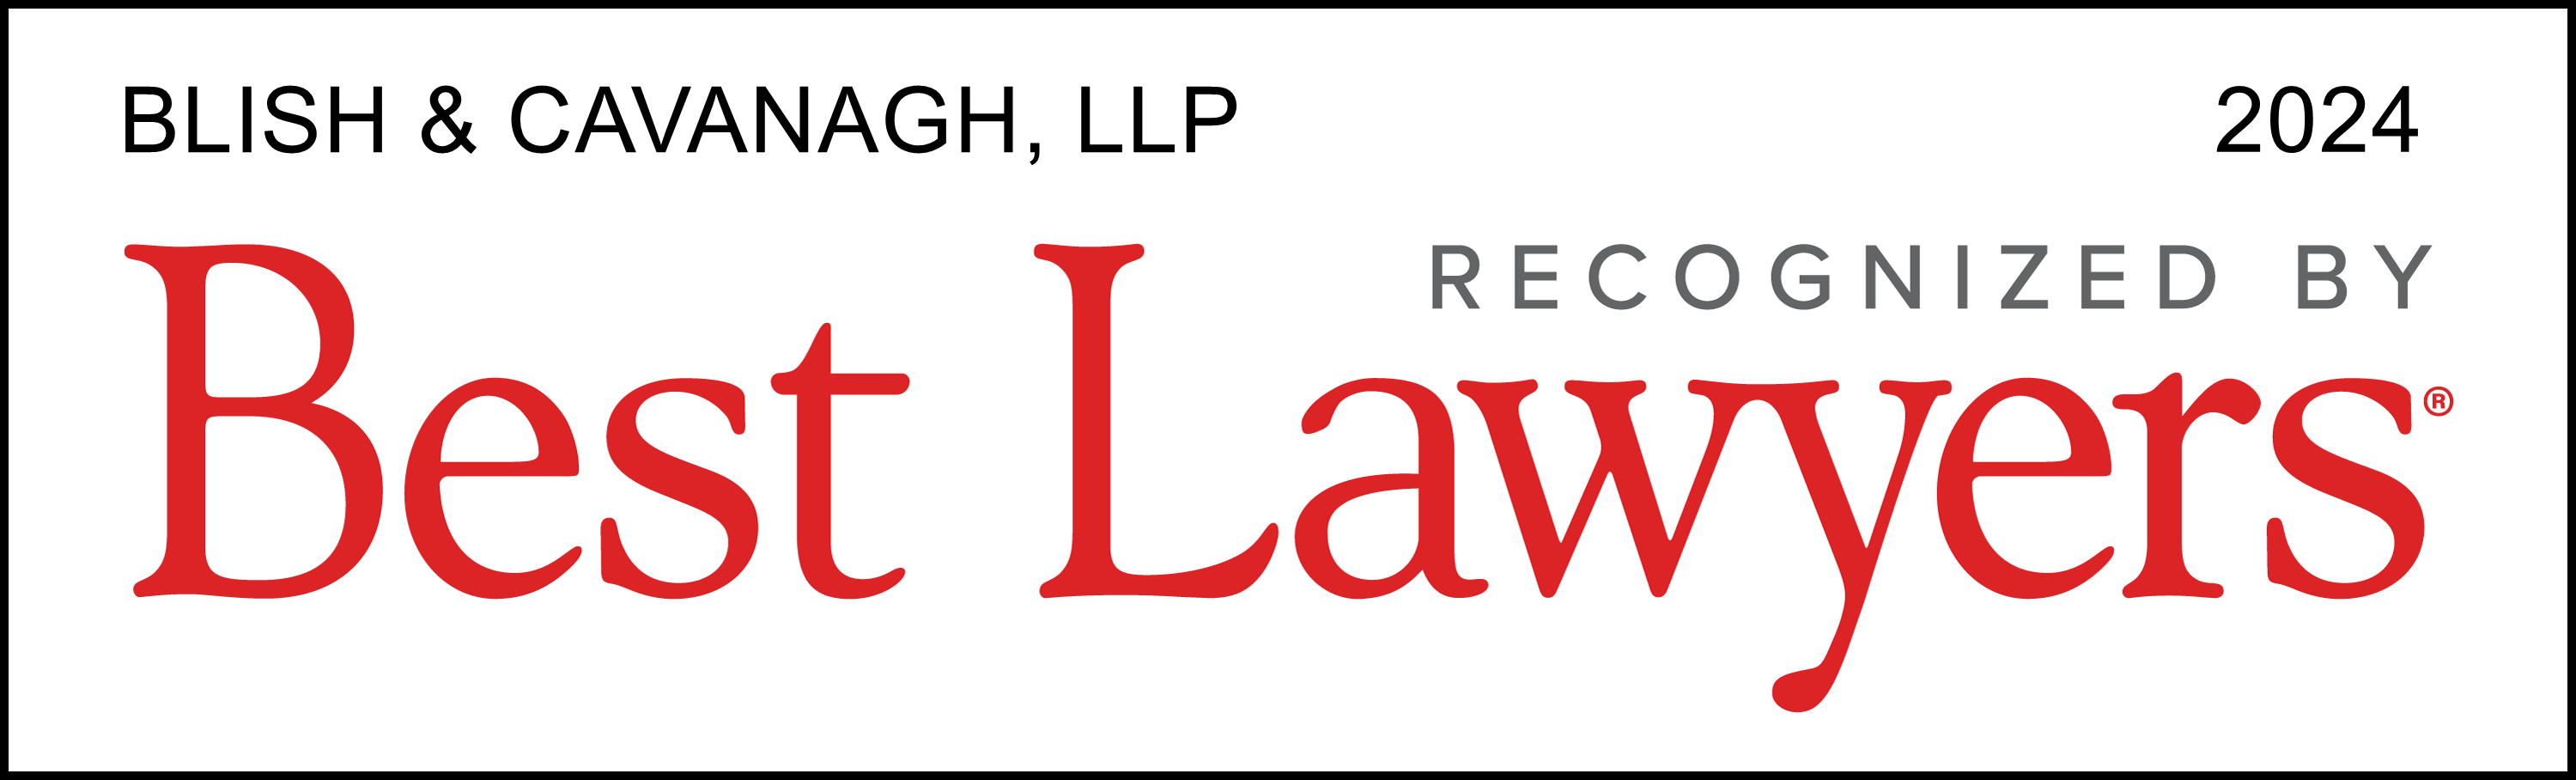 Blish & Cavanagh, LLP Recognized by Best Lawyers Firm 2024